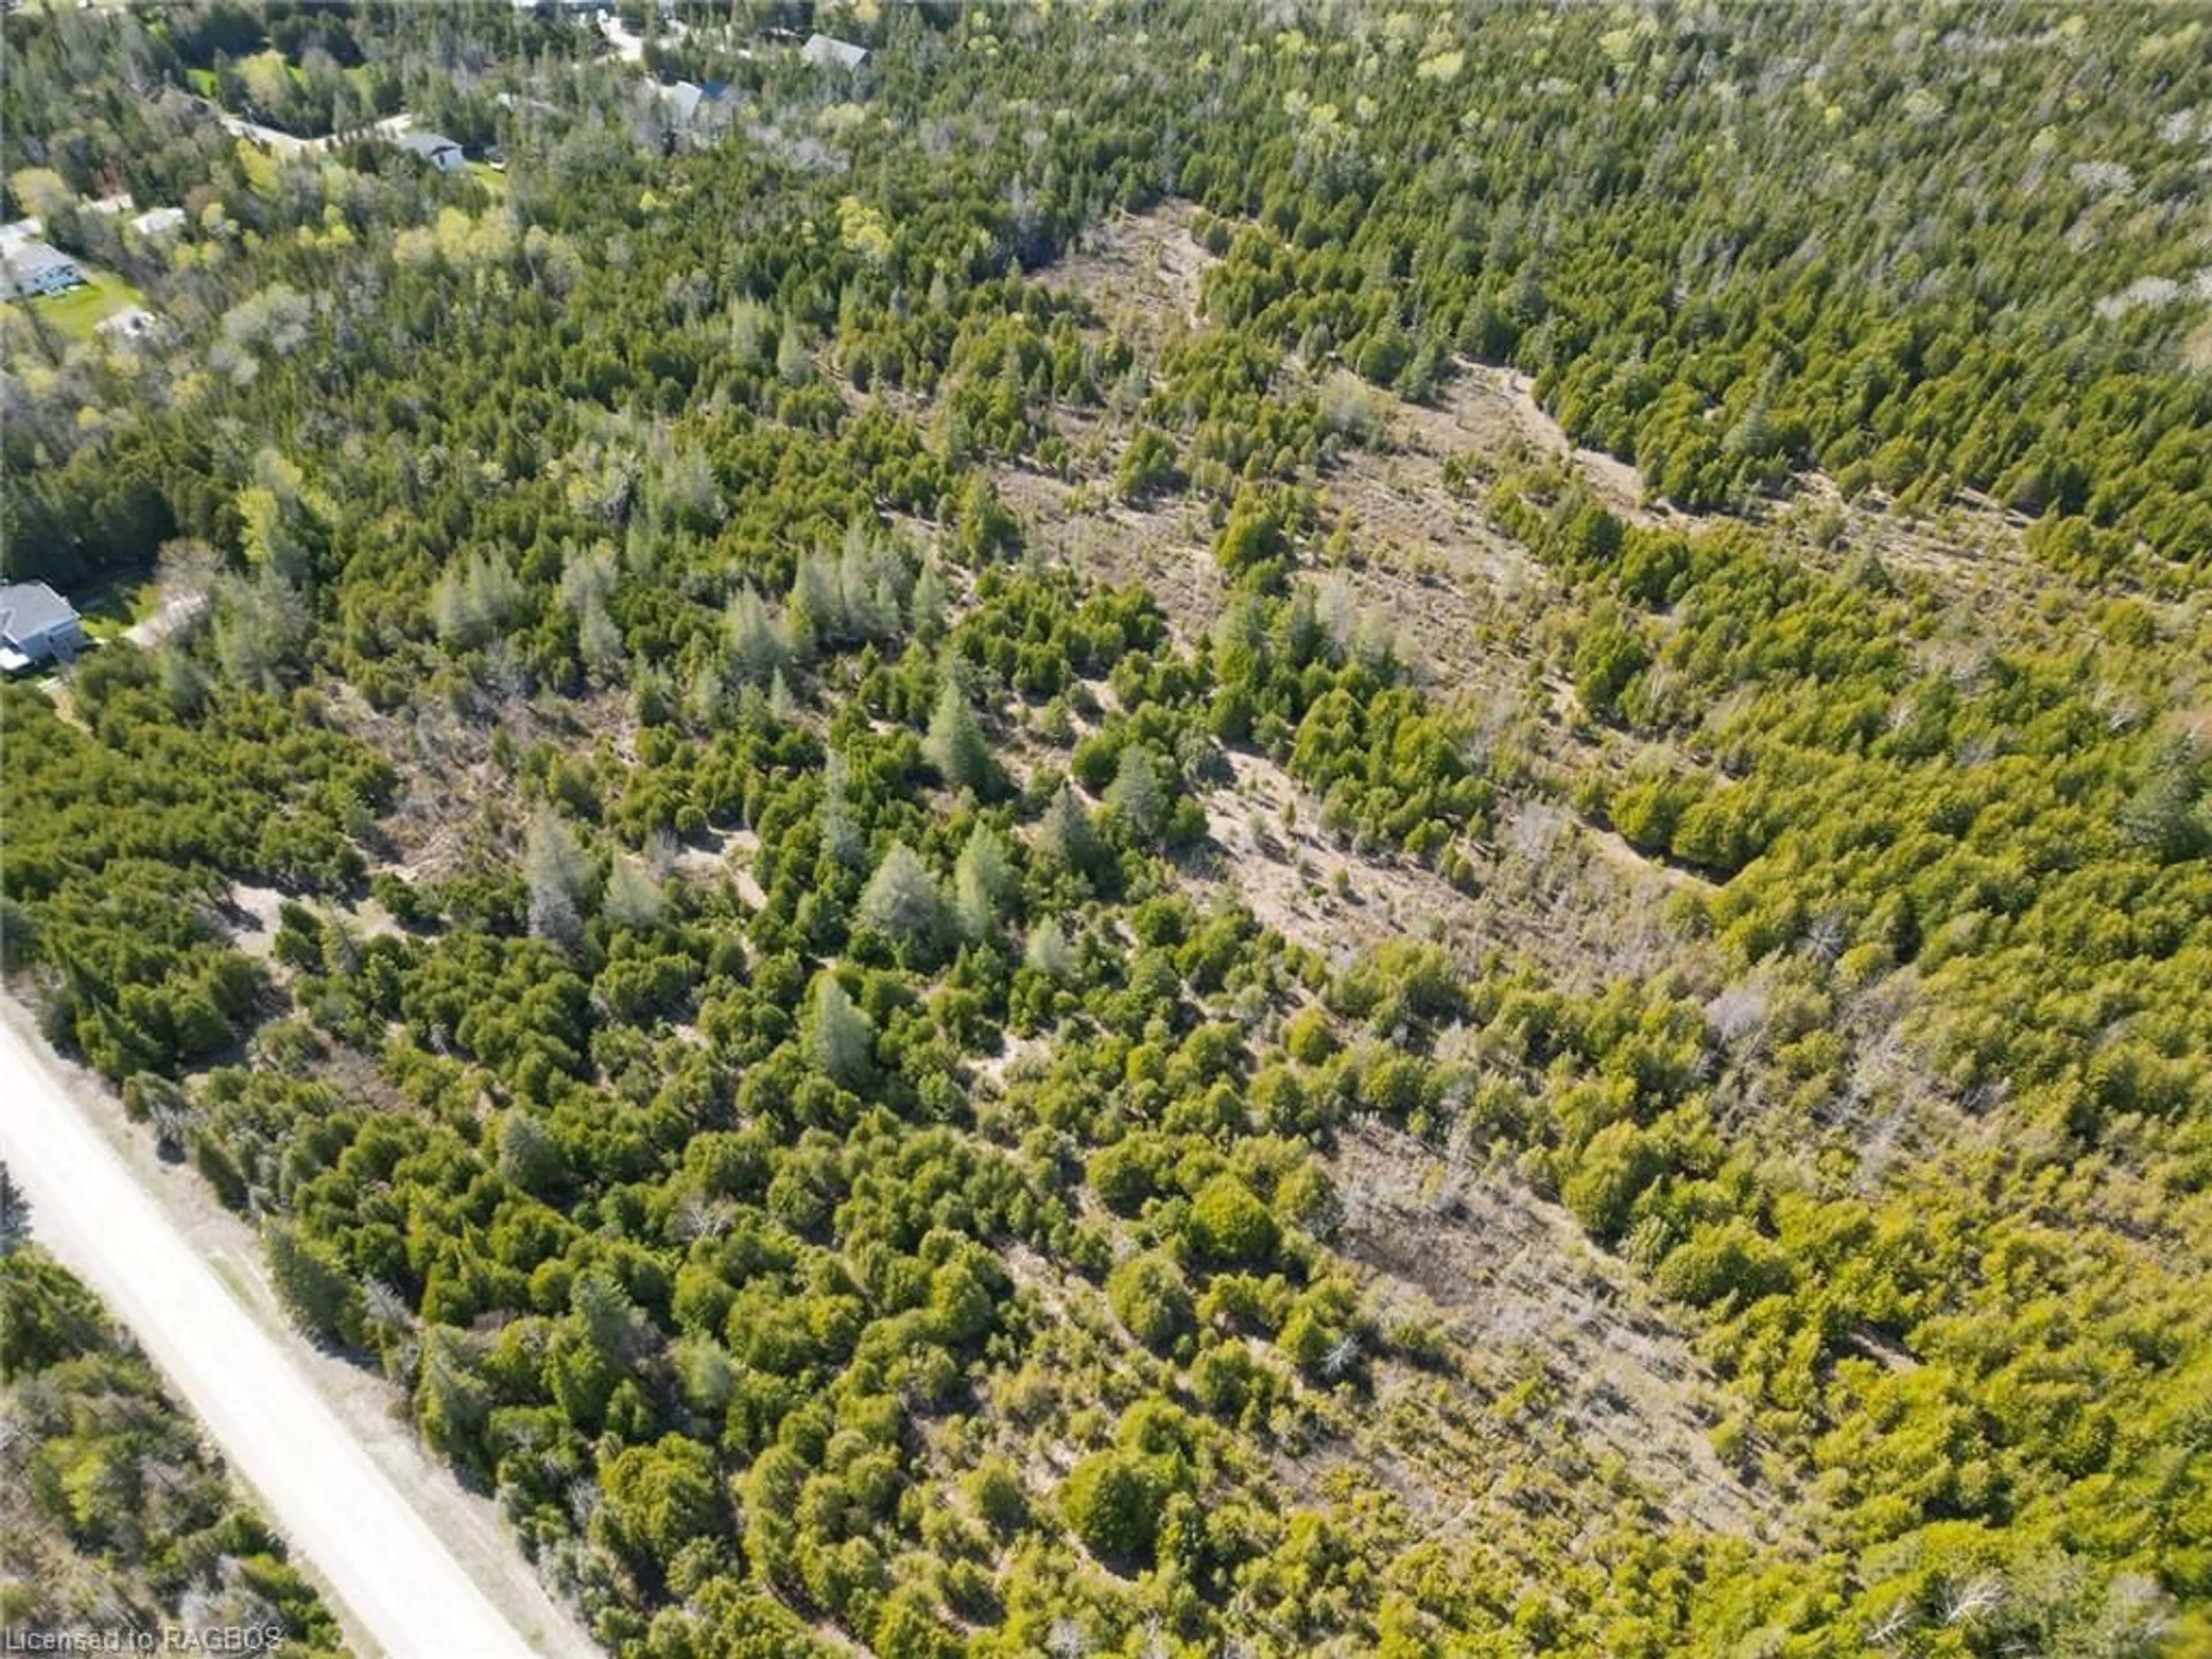 Forest view for PT LT 2 Concession 4 Wbr, Northern Bruce Peninsula Ontario N0H 2T0